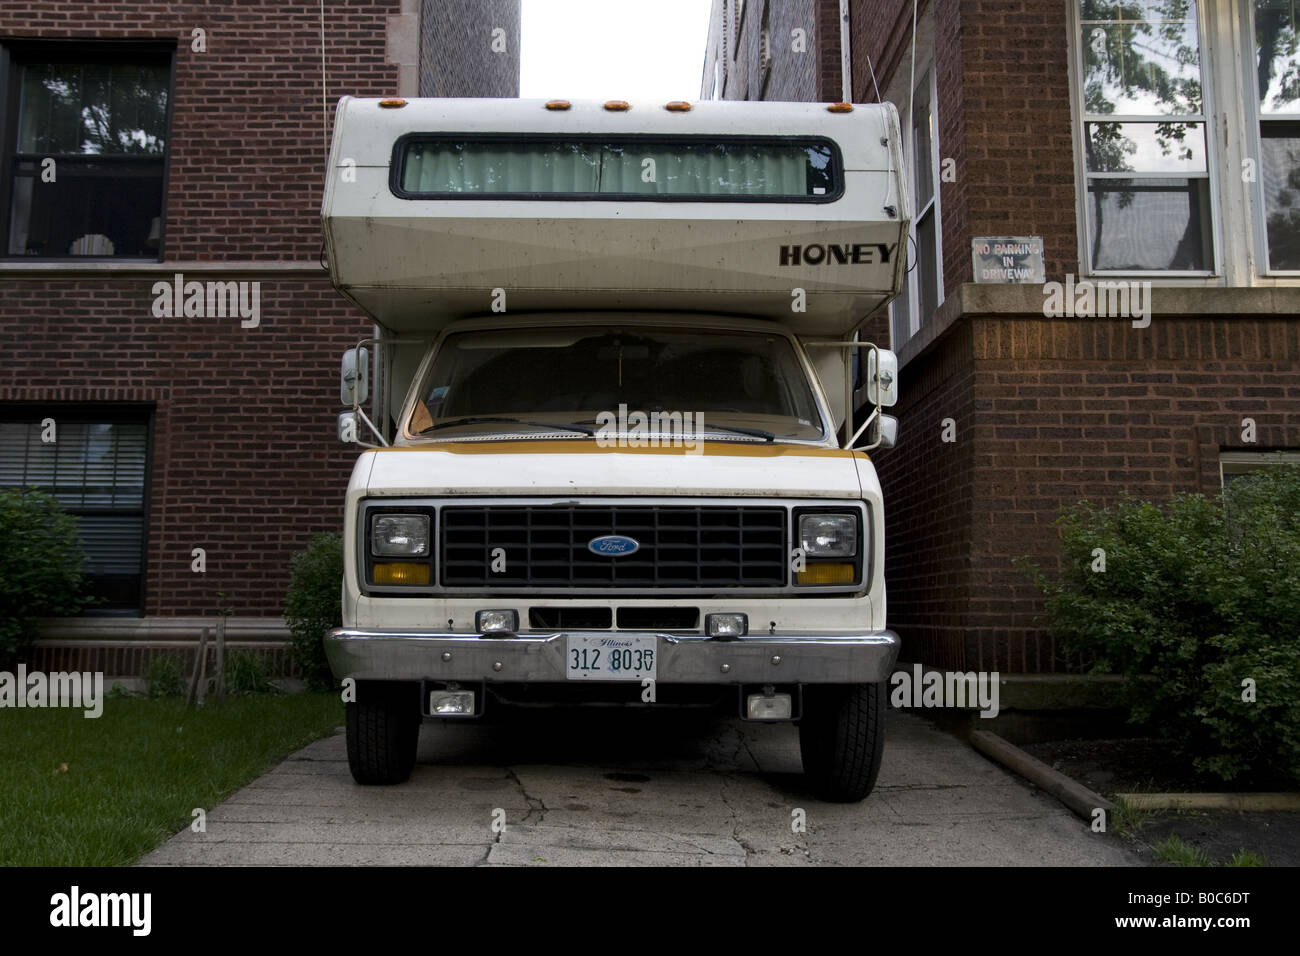 Ford camper van with a top wedged bewteen two apartment buildings Chicago IL Stock Photo